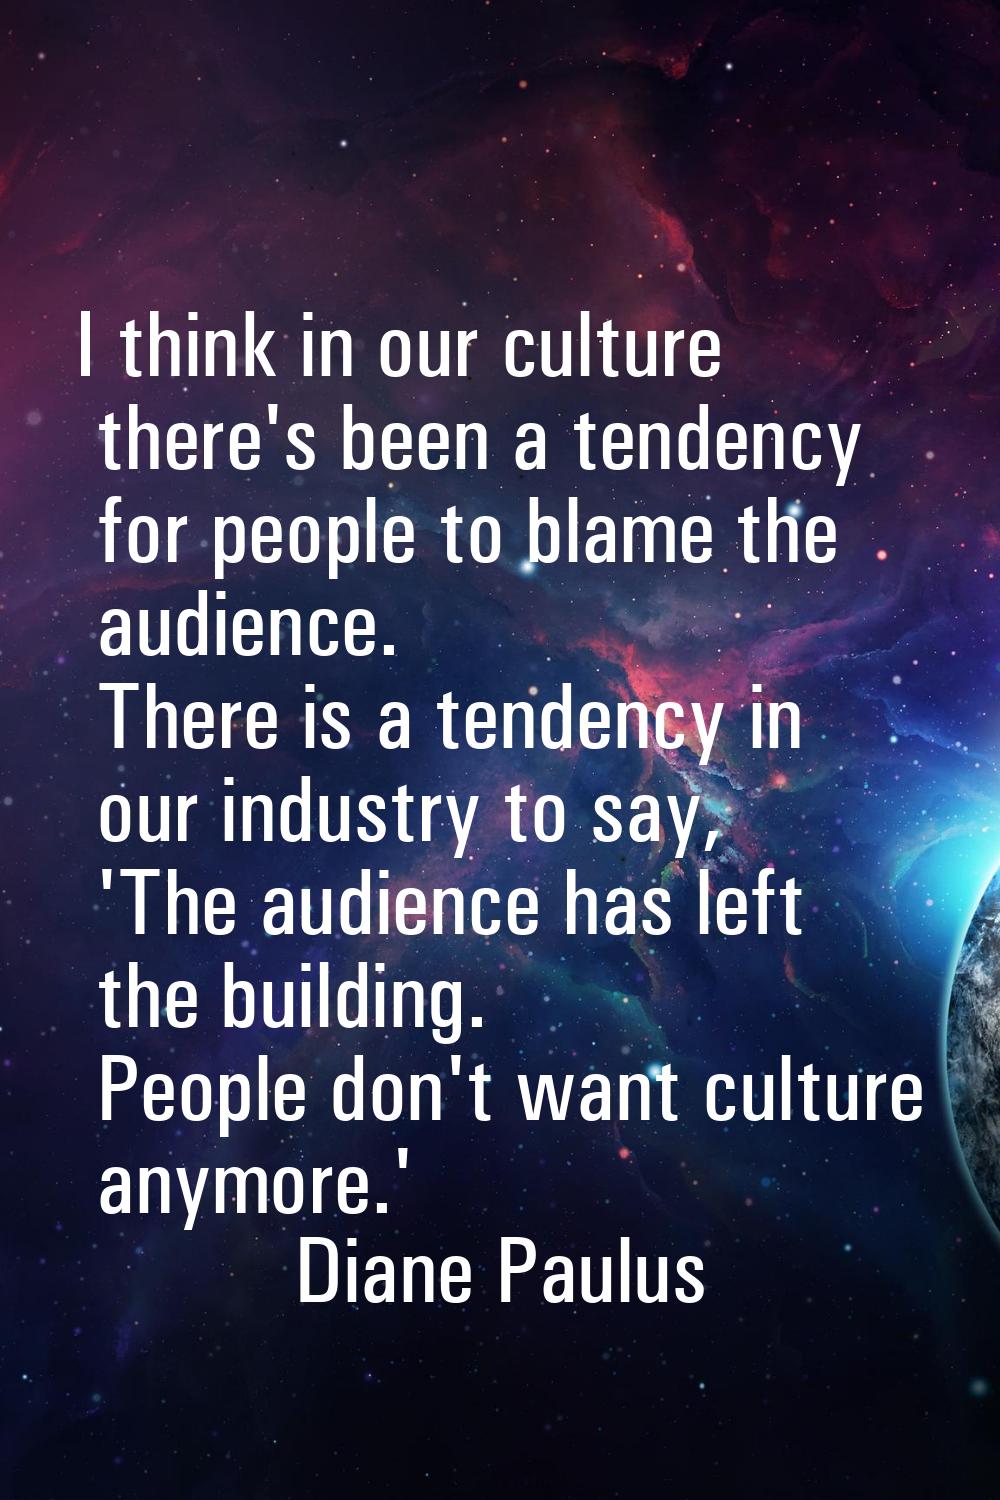 I think in our culture there's been a tendency for people to blame the audience. There is a tendenc